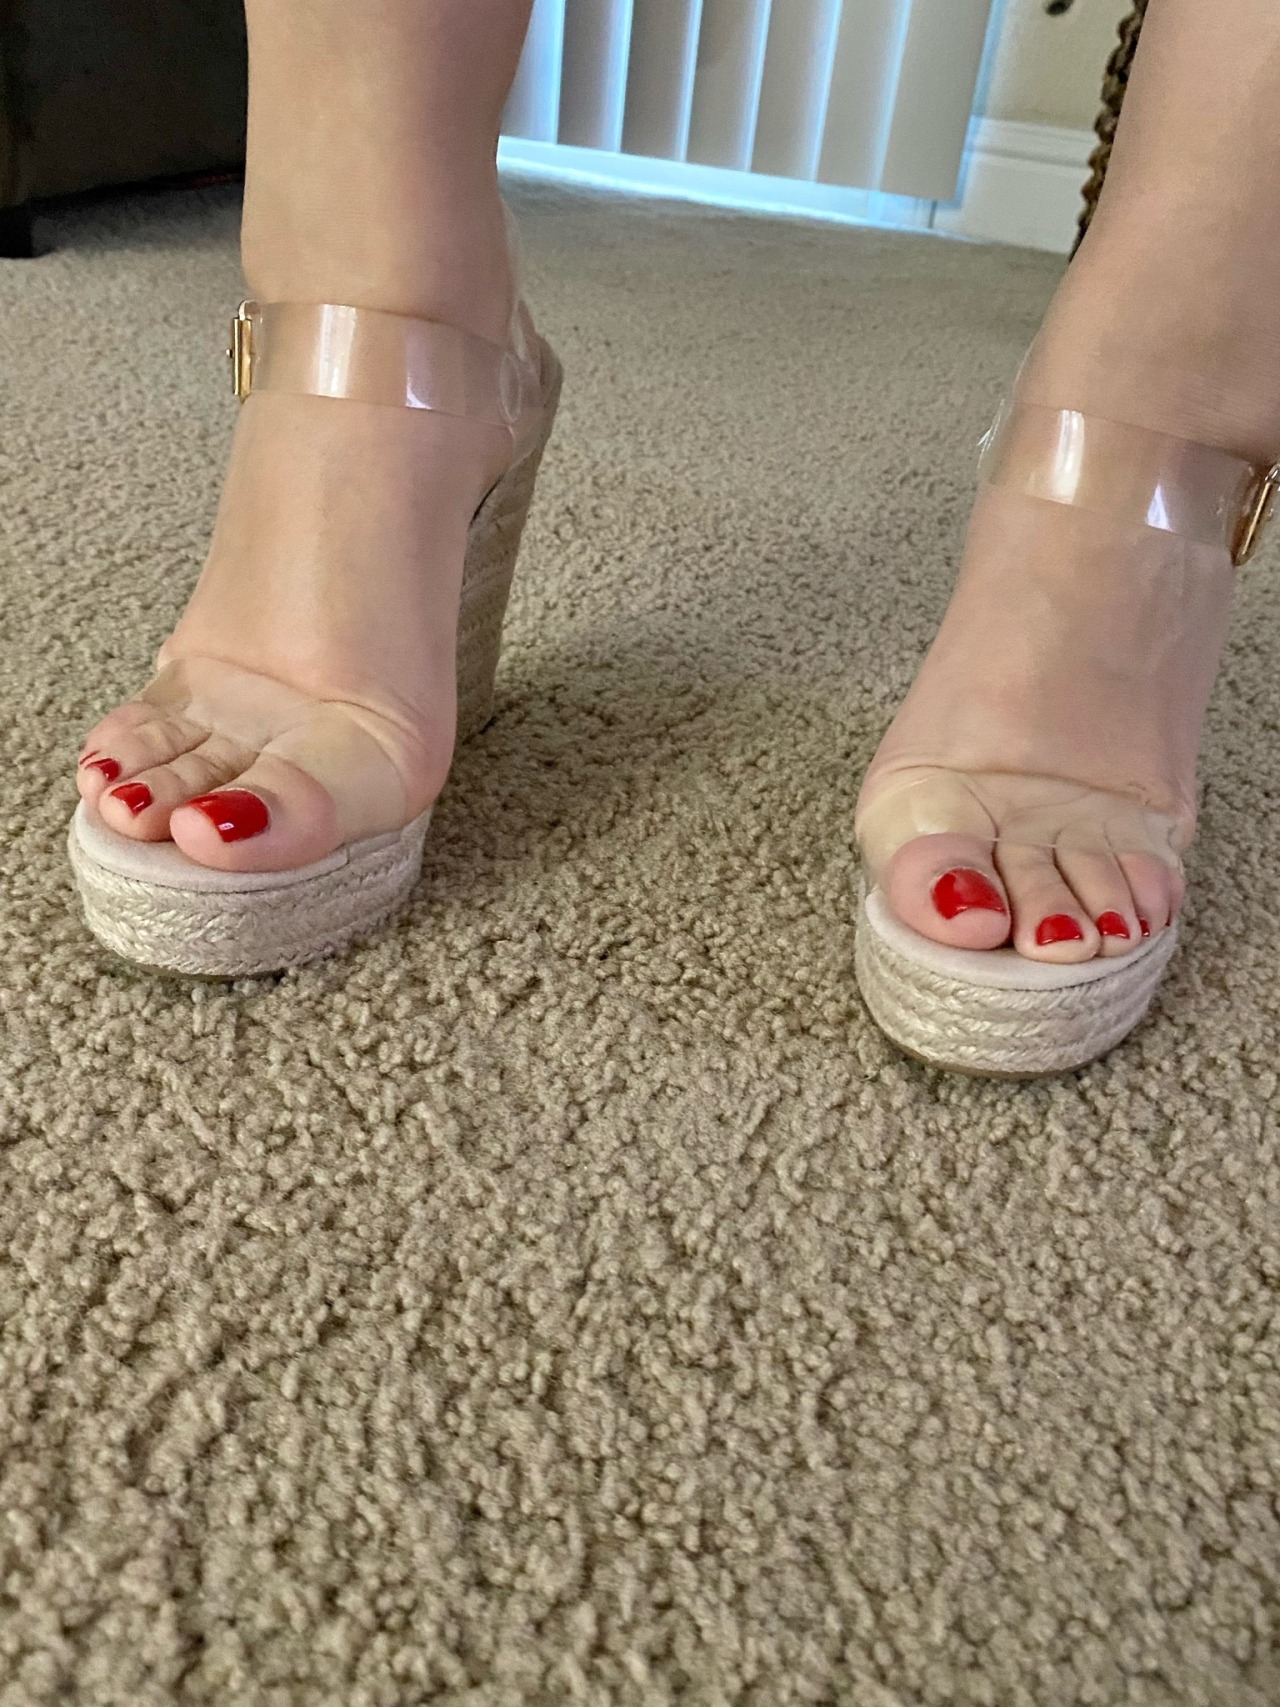 Feetmachine — My Sexy Wife S Feet In Wedges Please Reblog And